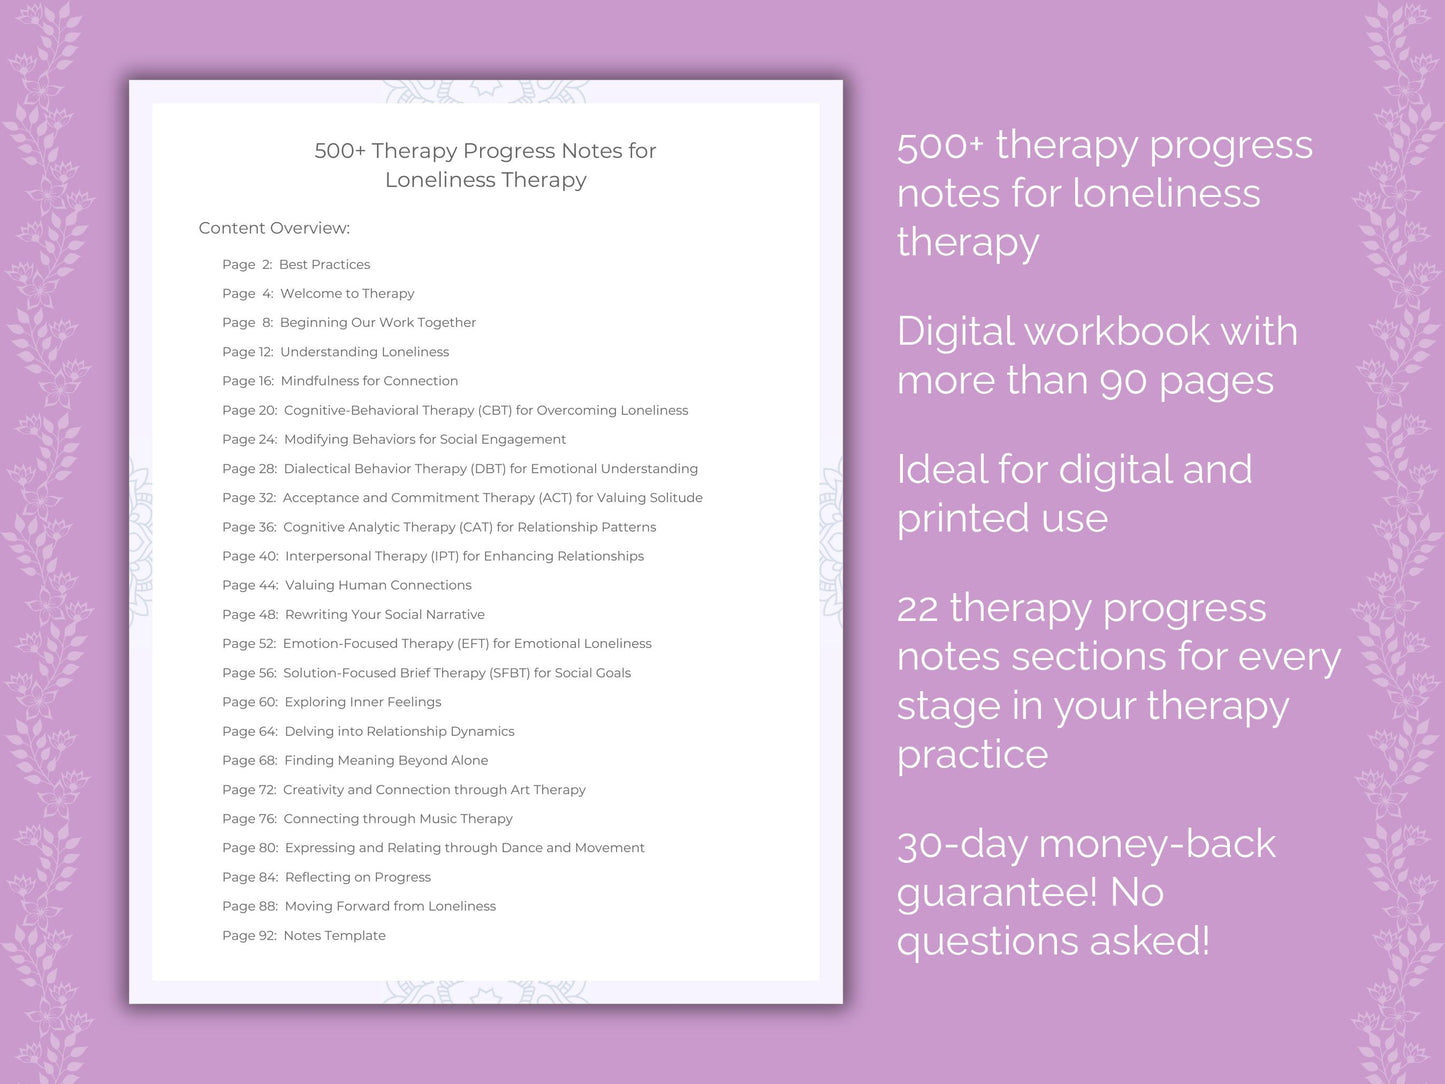 Loneliness Therapy Progress Notes Resource